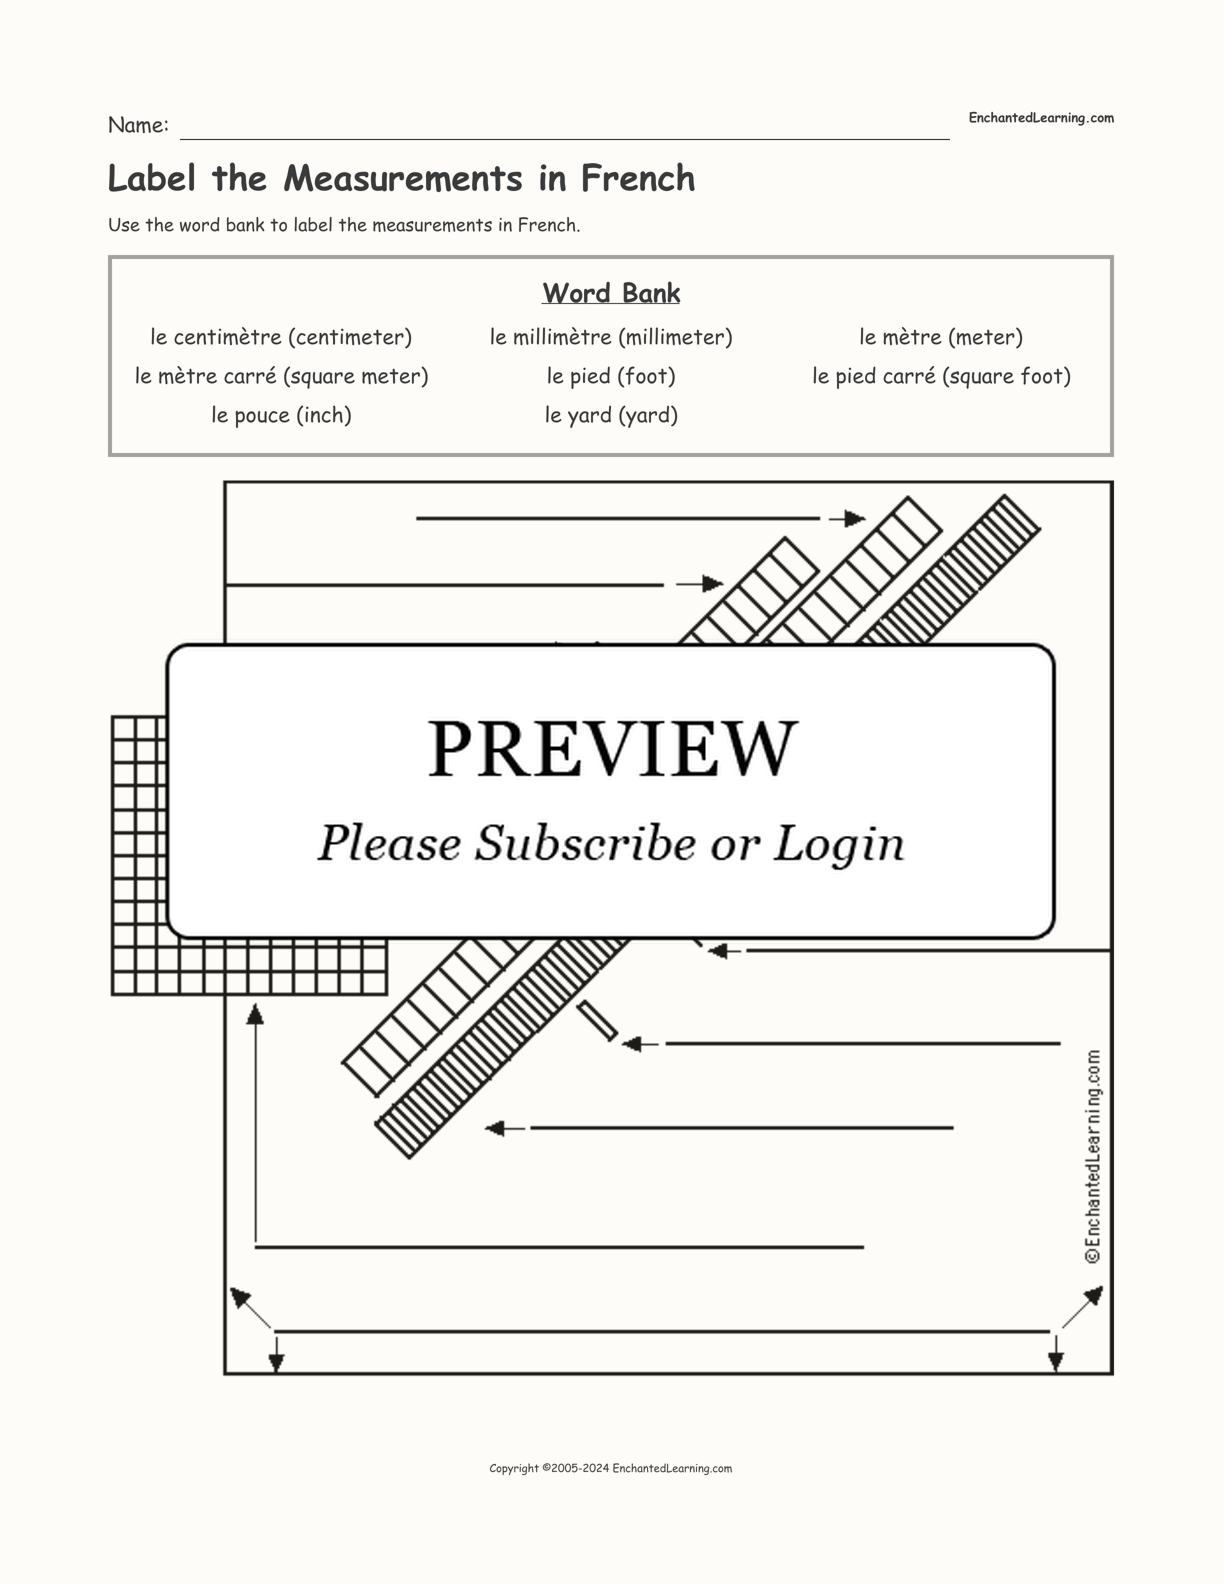 Label the Measurements in French interactive worksheet page 1